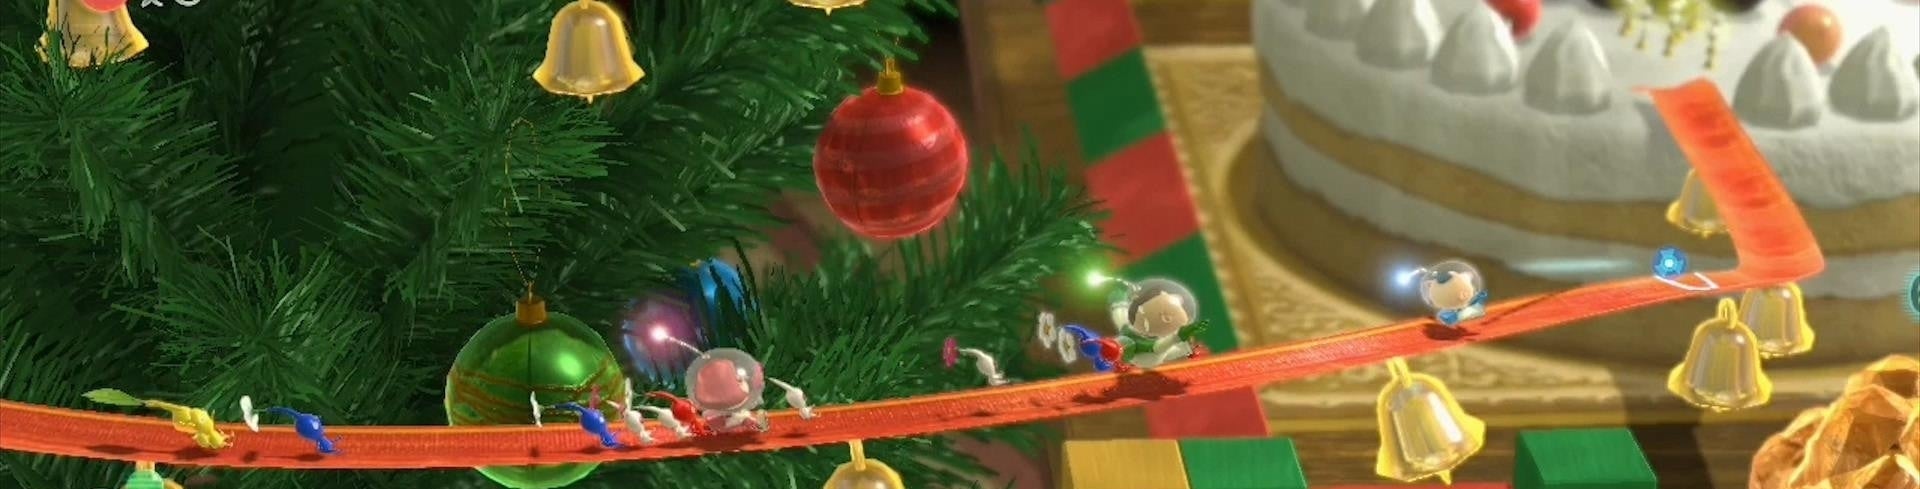 Imagem para Pikmin 3 - All New Mission Stages - Análise